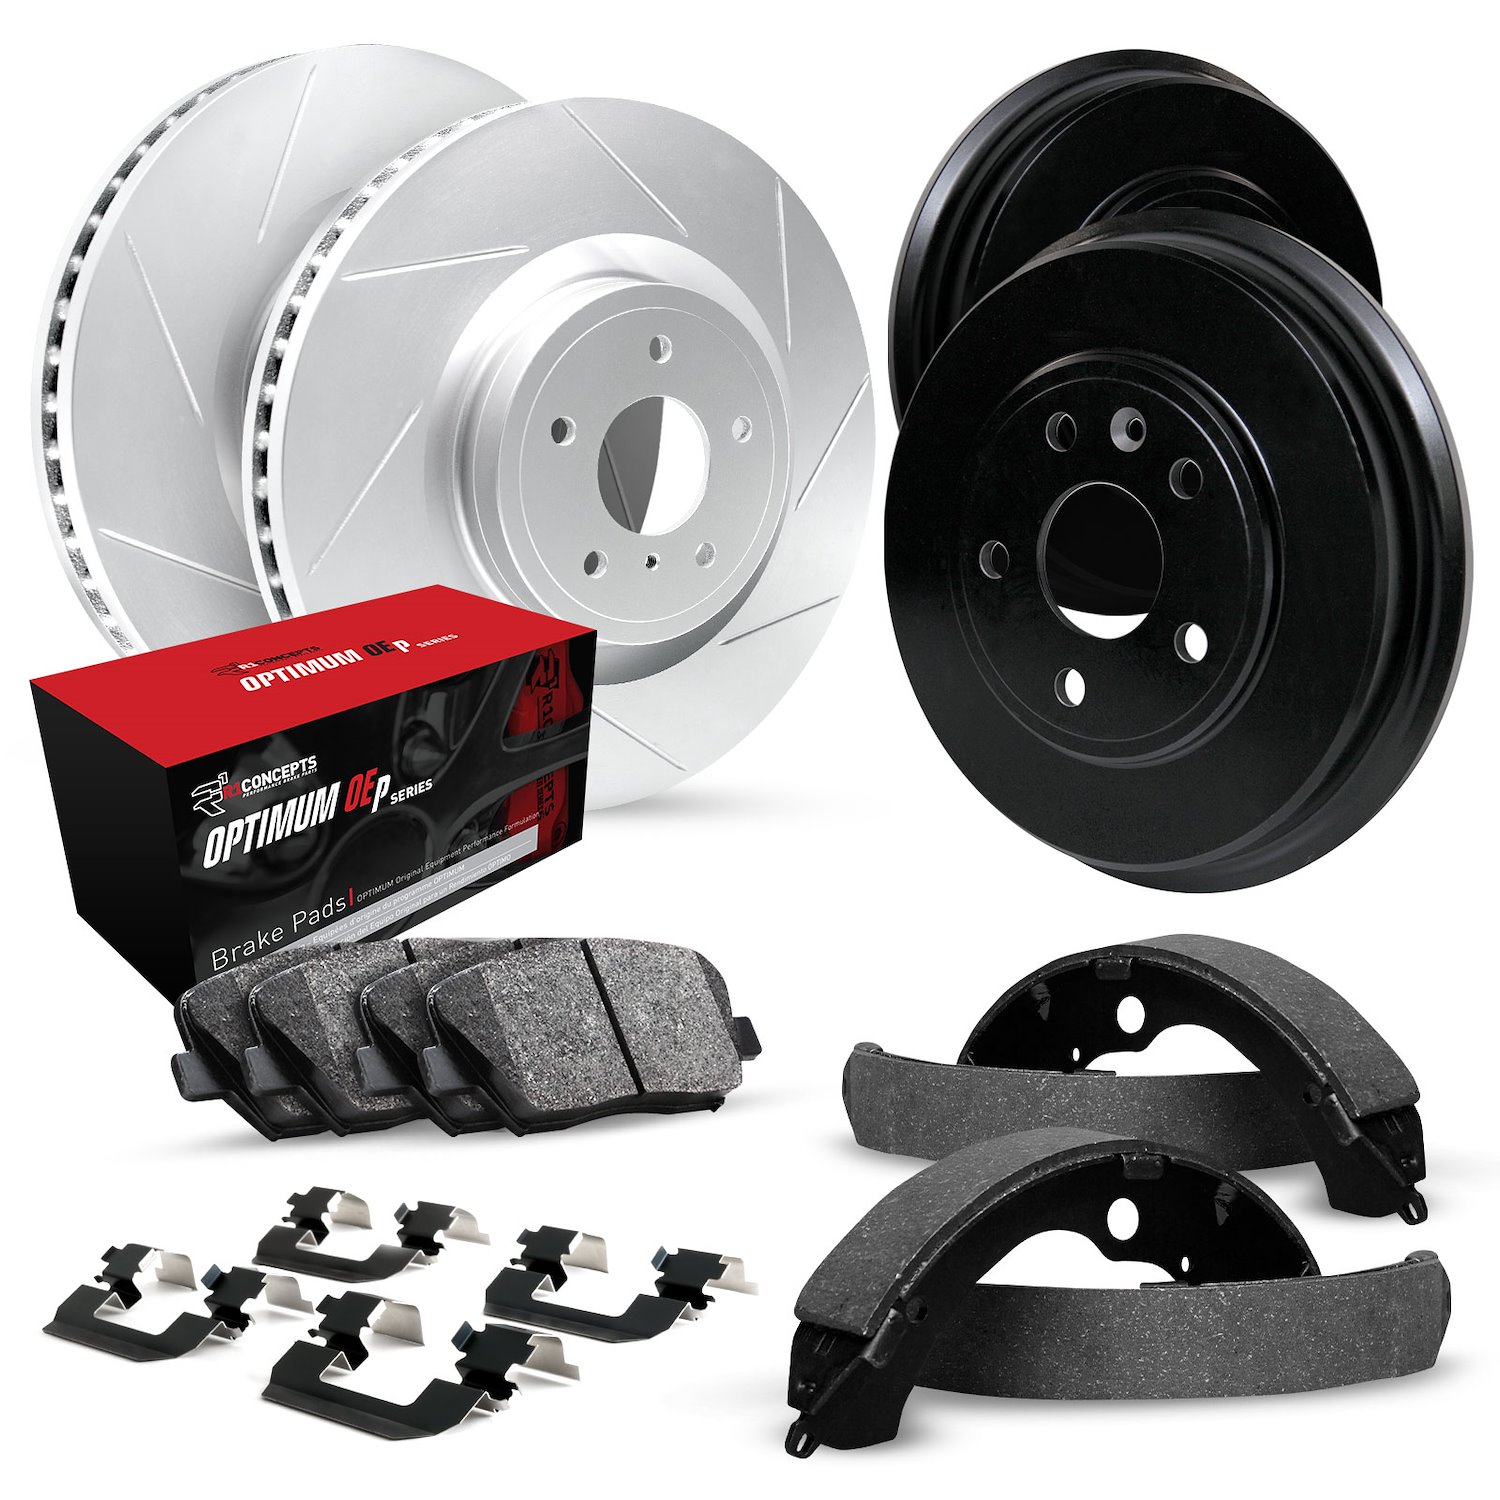 GEO-Carbon Slotted Brake Rotor & Drum Set w/Optimum OE Pads, Shoes, & Hardware, 1980-1989 Ford/Lincoln/Mercury/Mazda